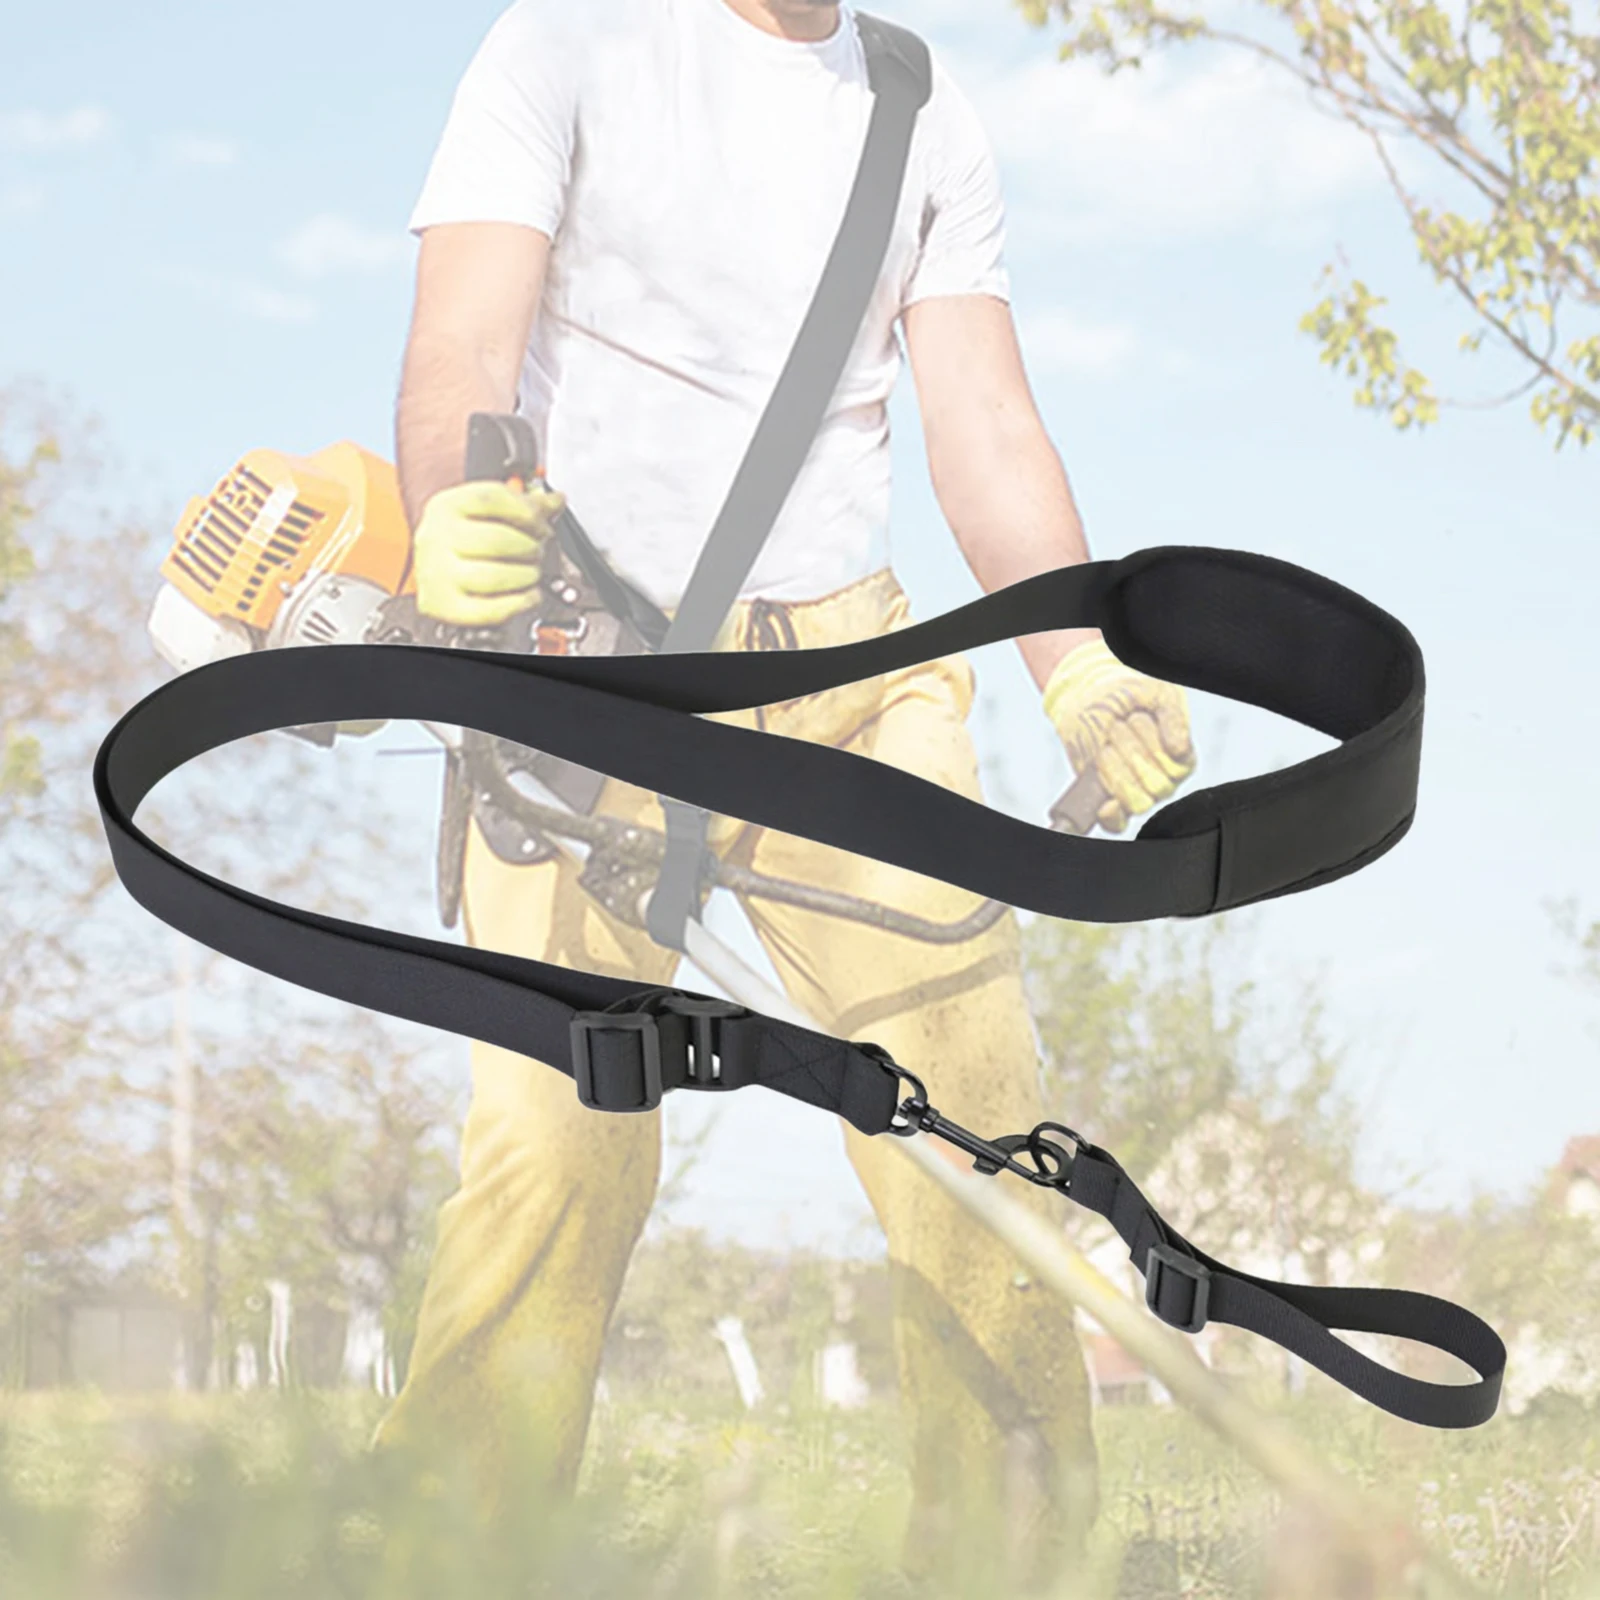 1Pc Black Strimmer Shoulder Harness Strap Lawn Mower Cutter Carry with Hook Trimmer Straps Universal